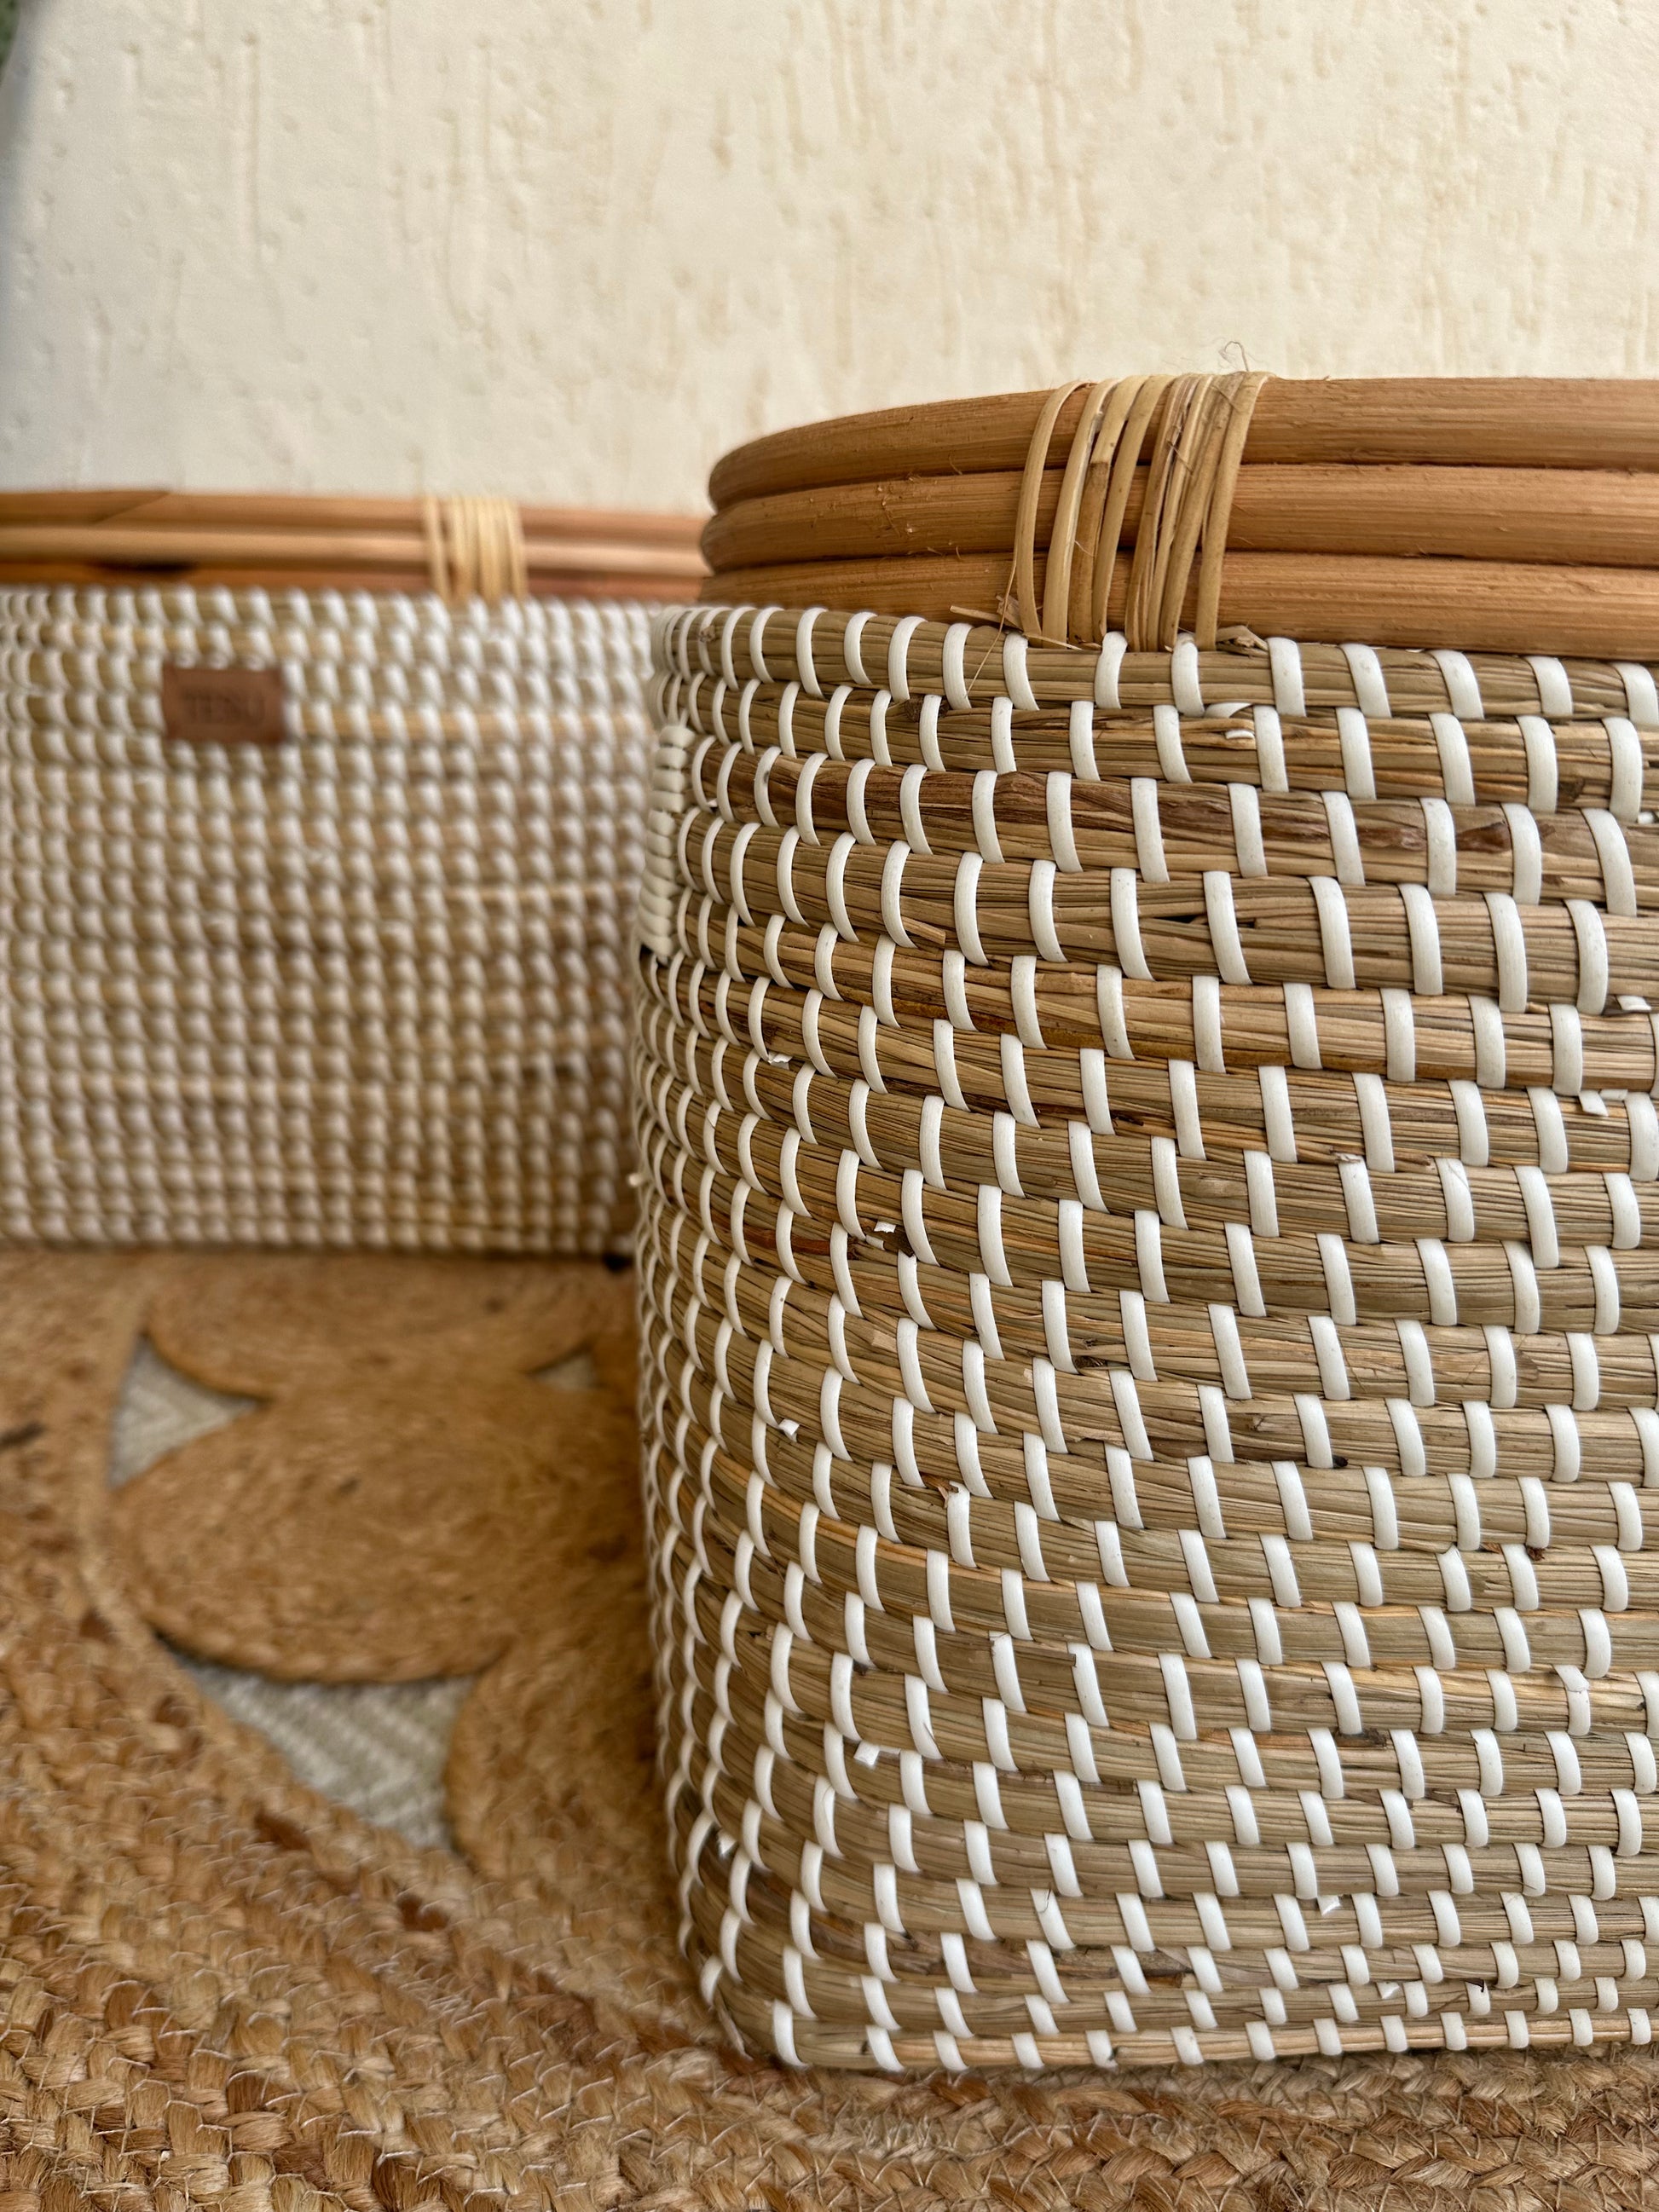 Enhance your Dream Home with our curated selection of premium Home Décor items.  Sea grass Plant Holder Cut out Handles mixed with Rattan, Perfect for decorating your home, living room decor, bedroom interior touches, beautiful cover pots and much more. Its placement is very flexible which is suitable for beautifying your room. A natural addition to any home these baskets can be used on their own or as a combination and are ideal for storage of towels, toys, papers and other household clutter